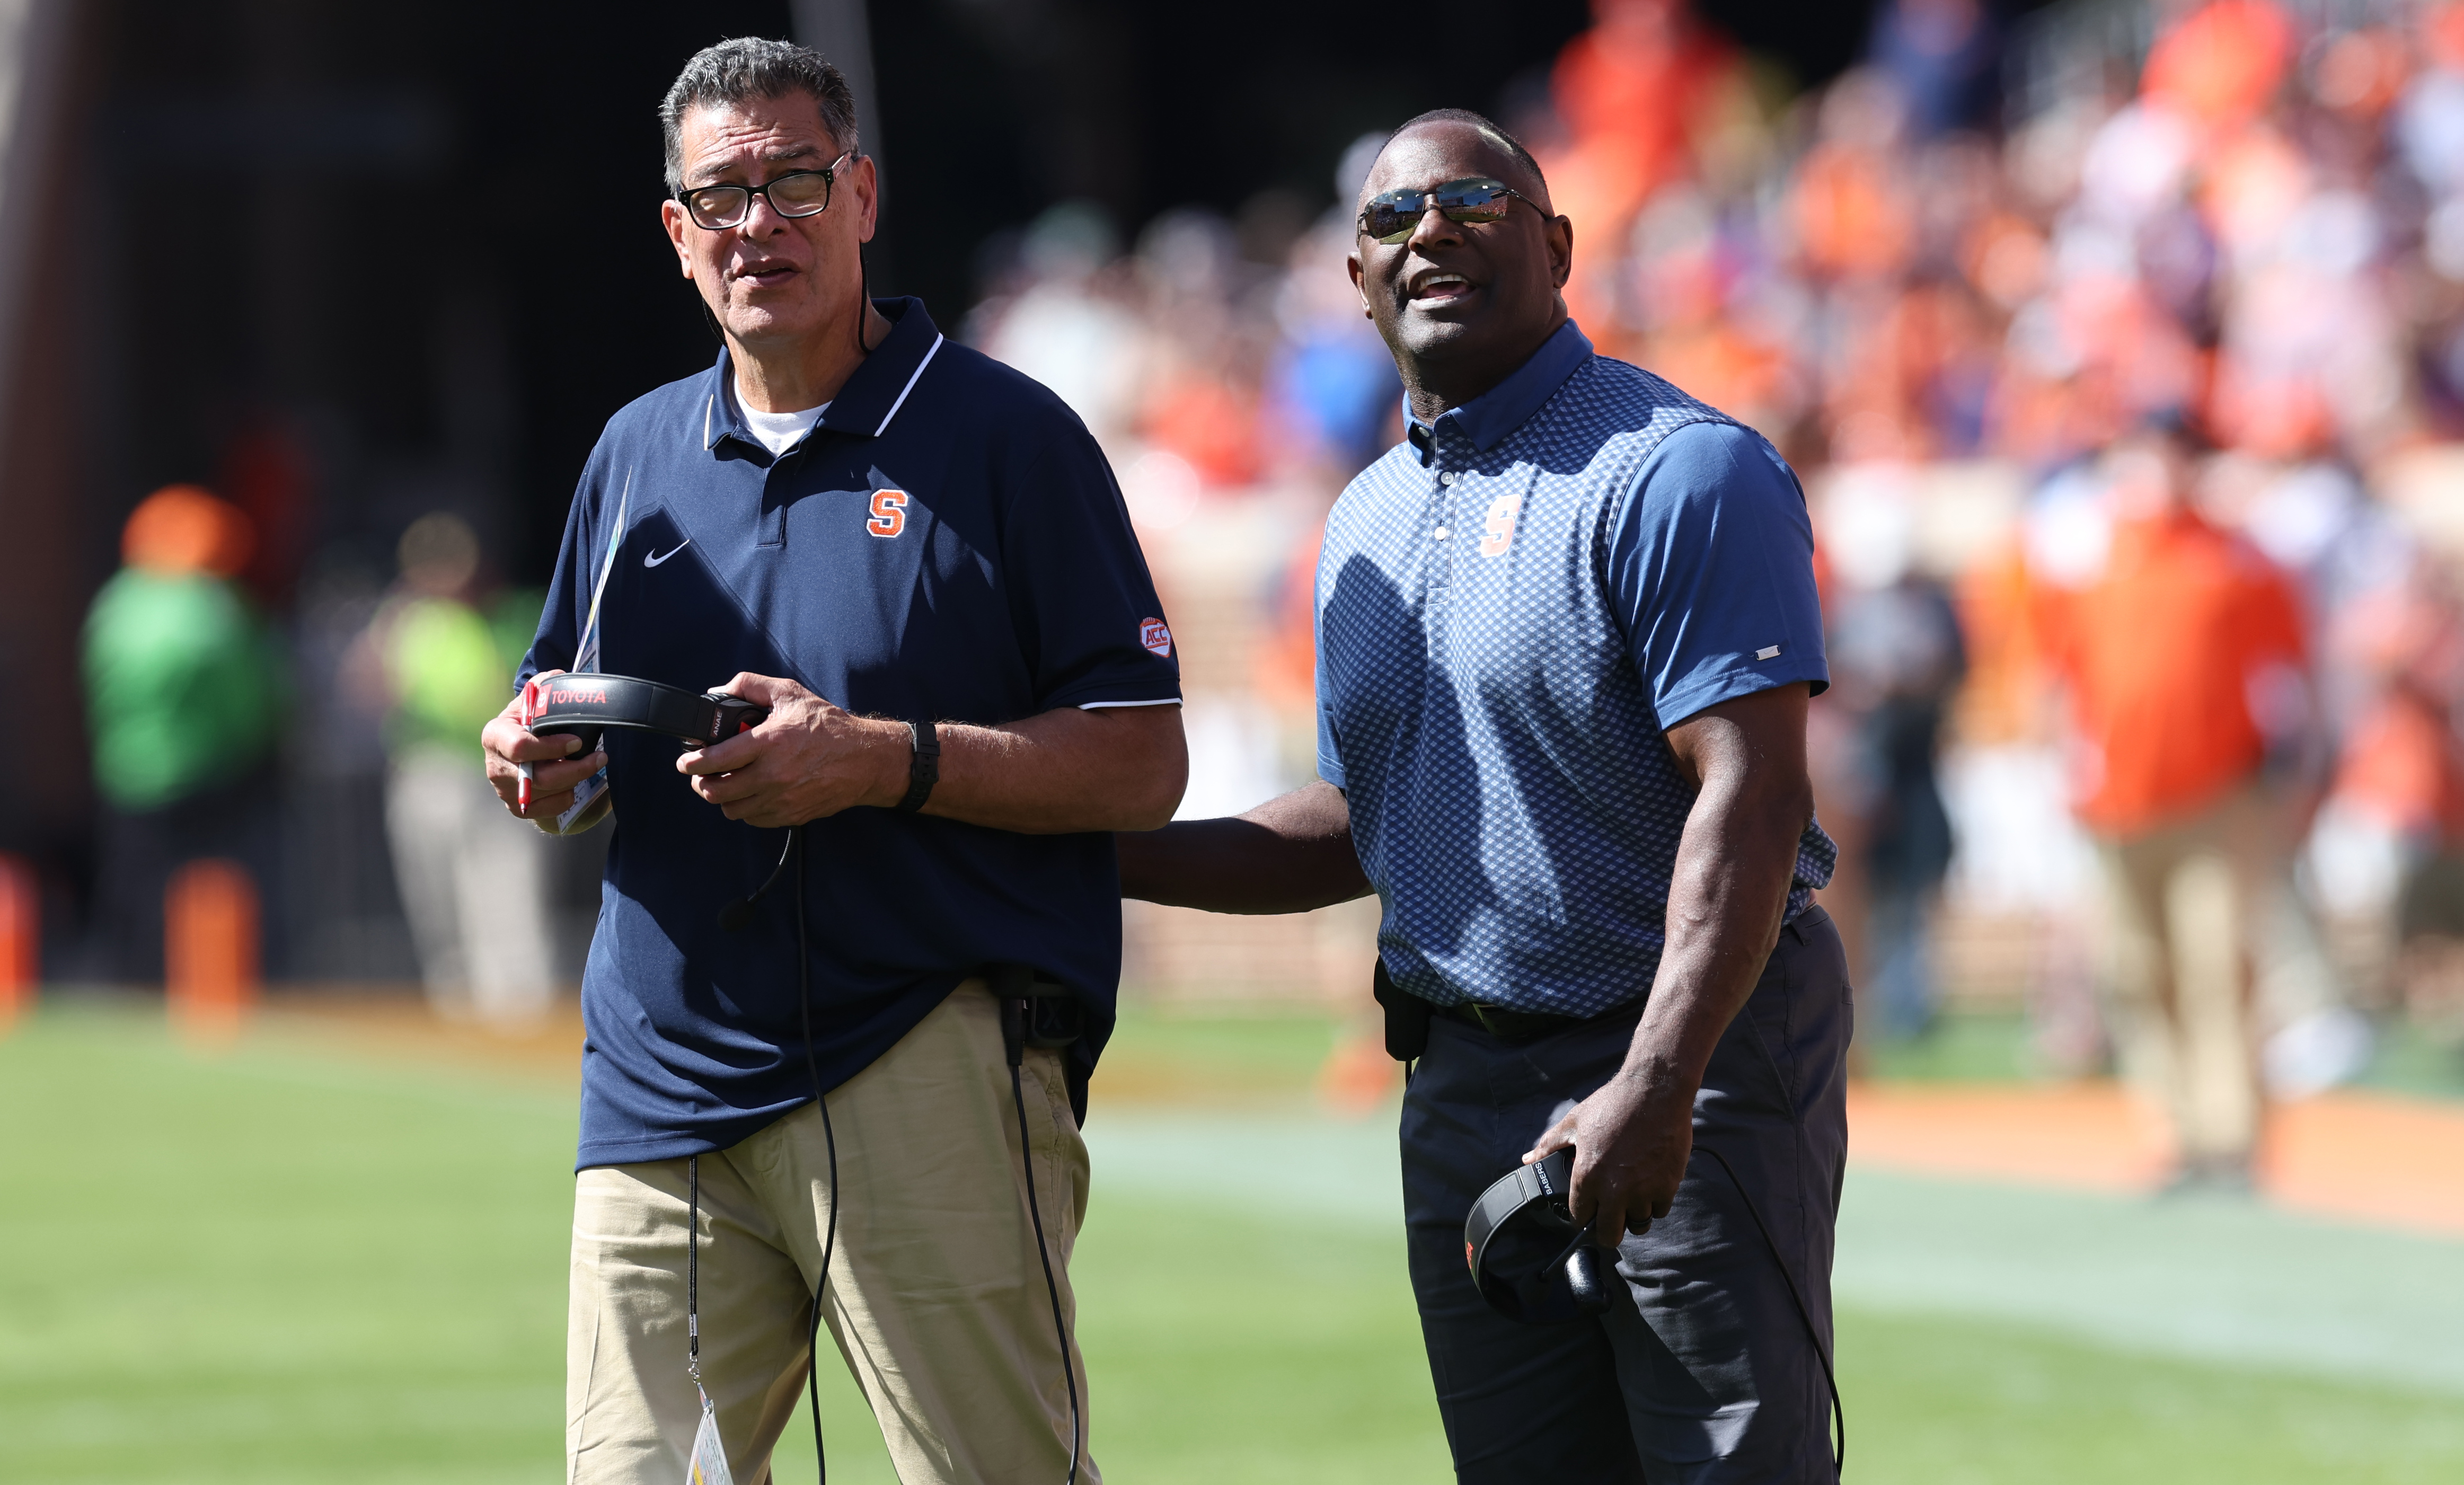 Syracuse University would owe football coach Dino Babers over $10